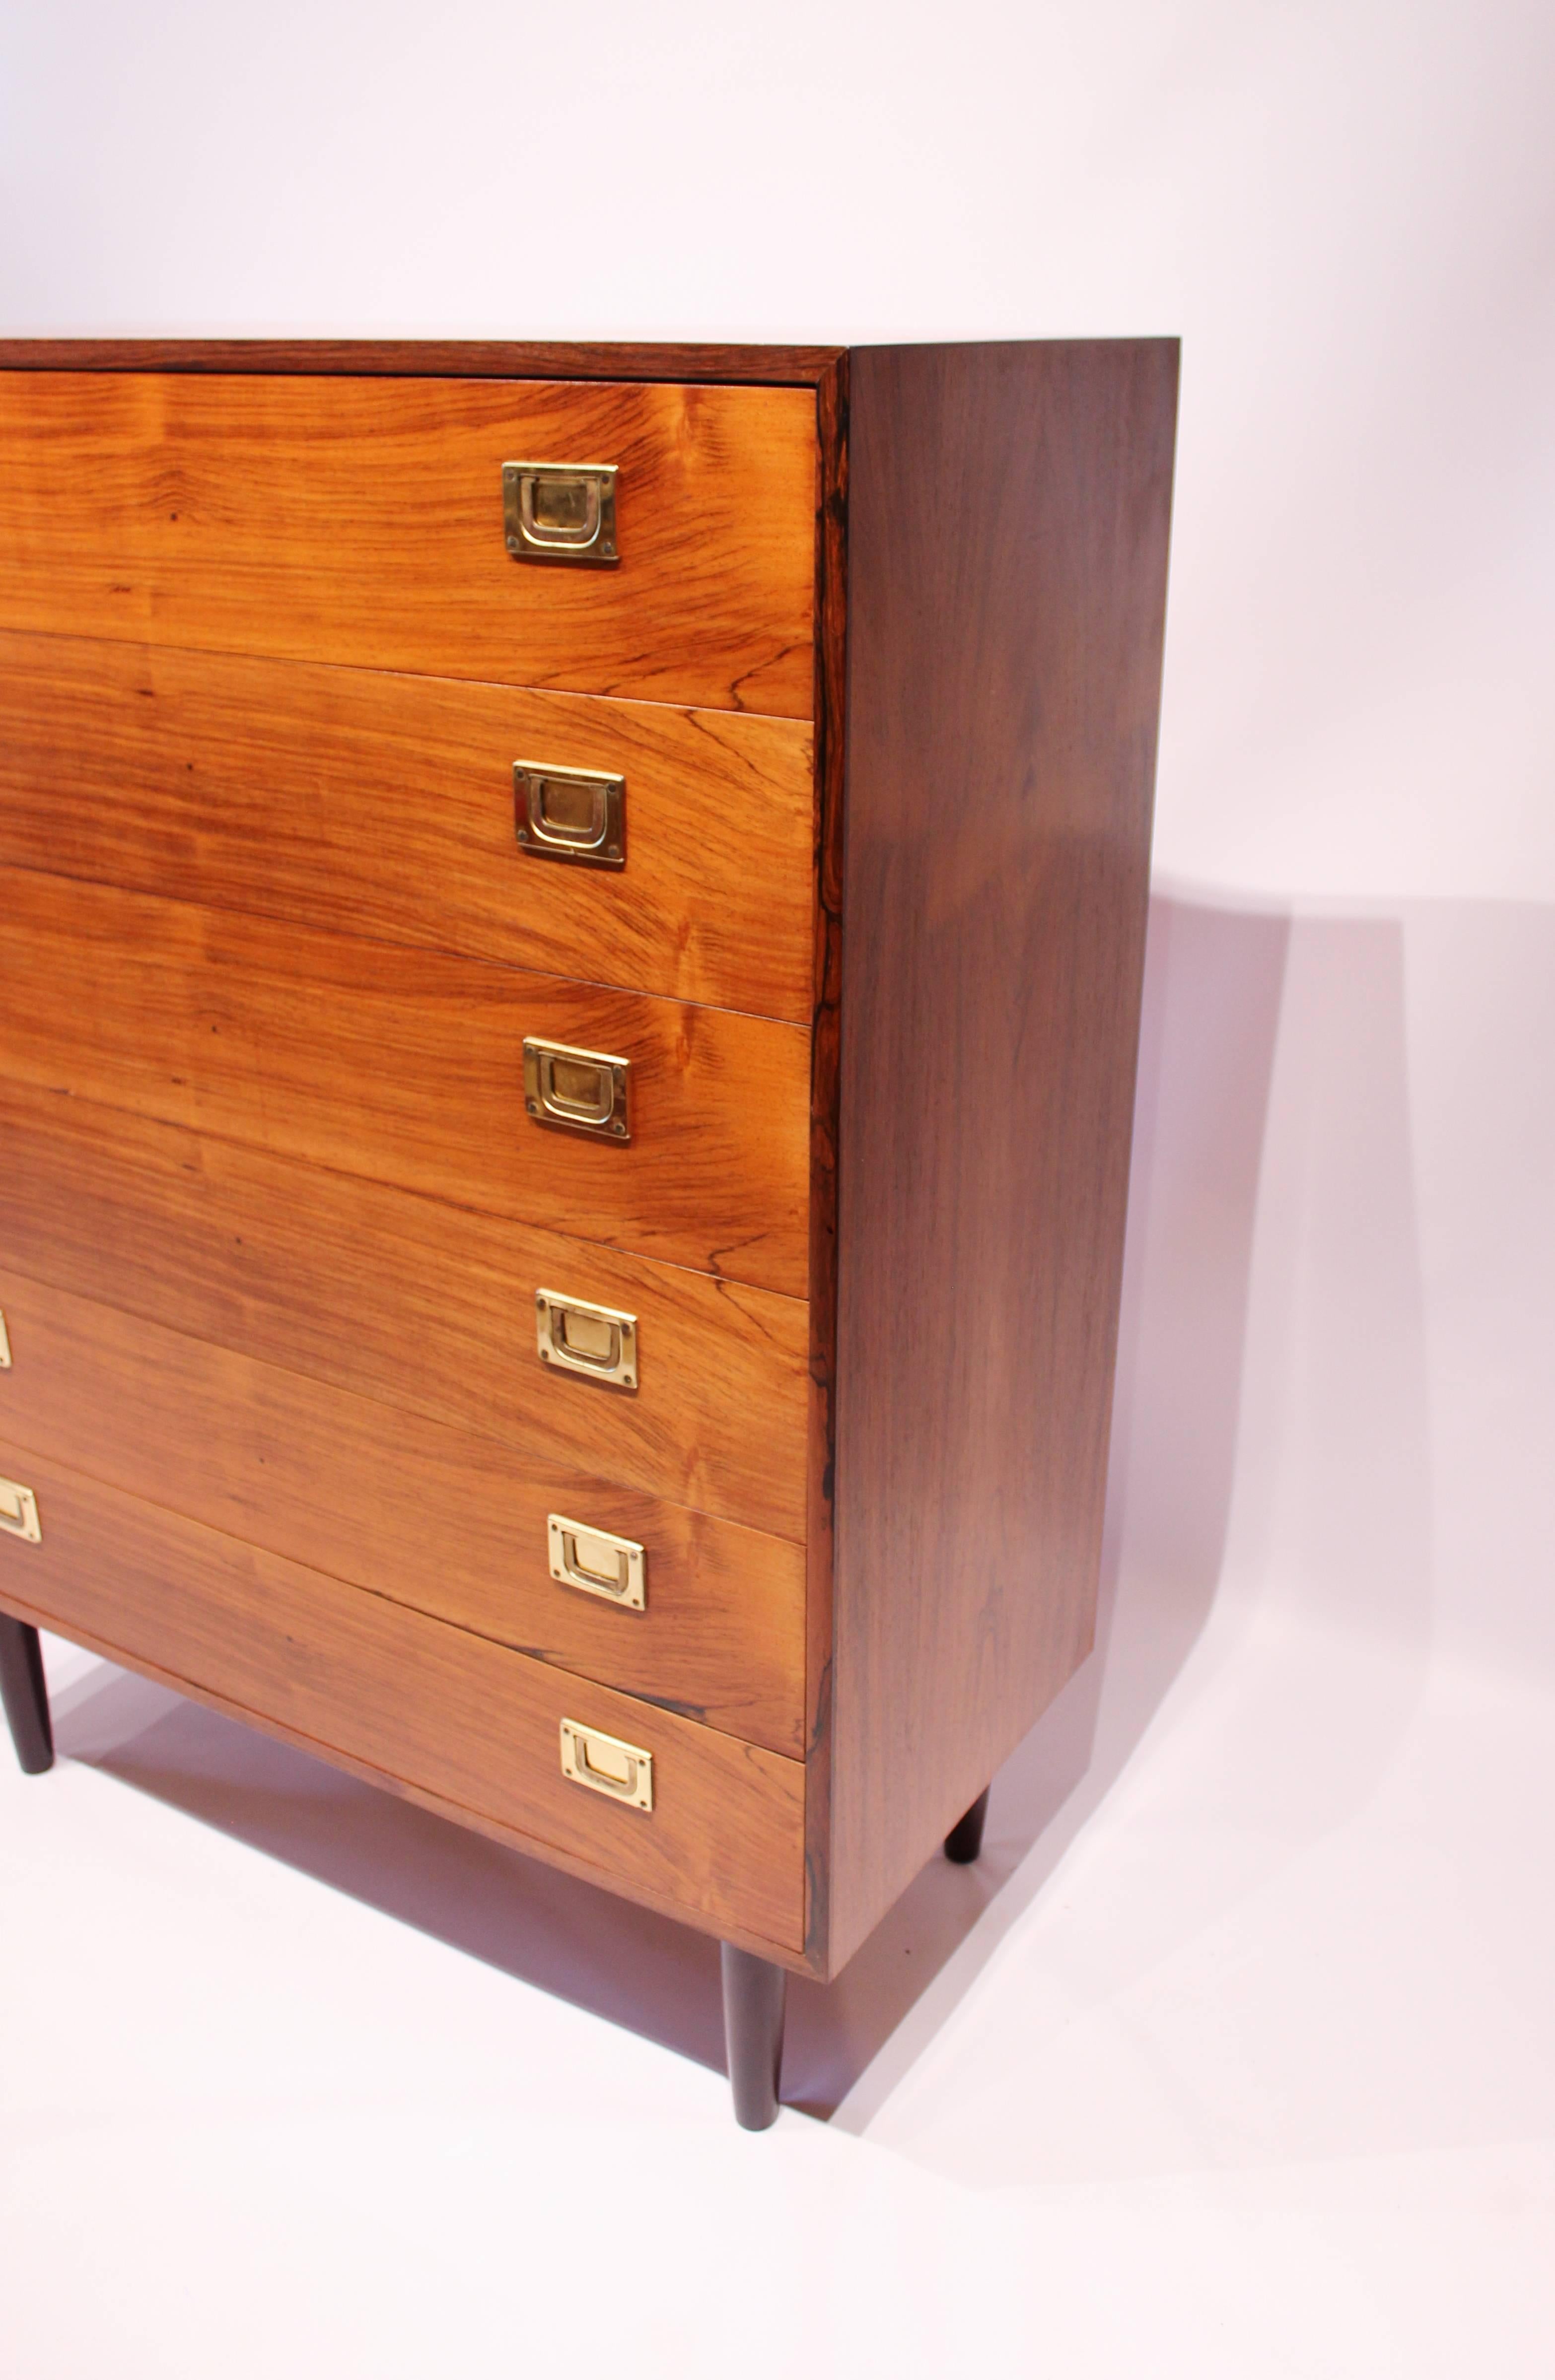 Scandinavian Modern Chest of Drawers in Rosewood by Reoval, Danish Design, 1960s